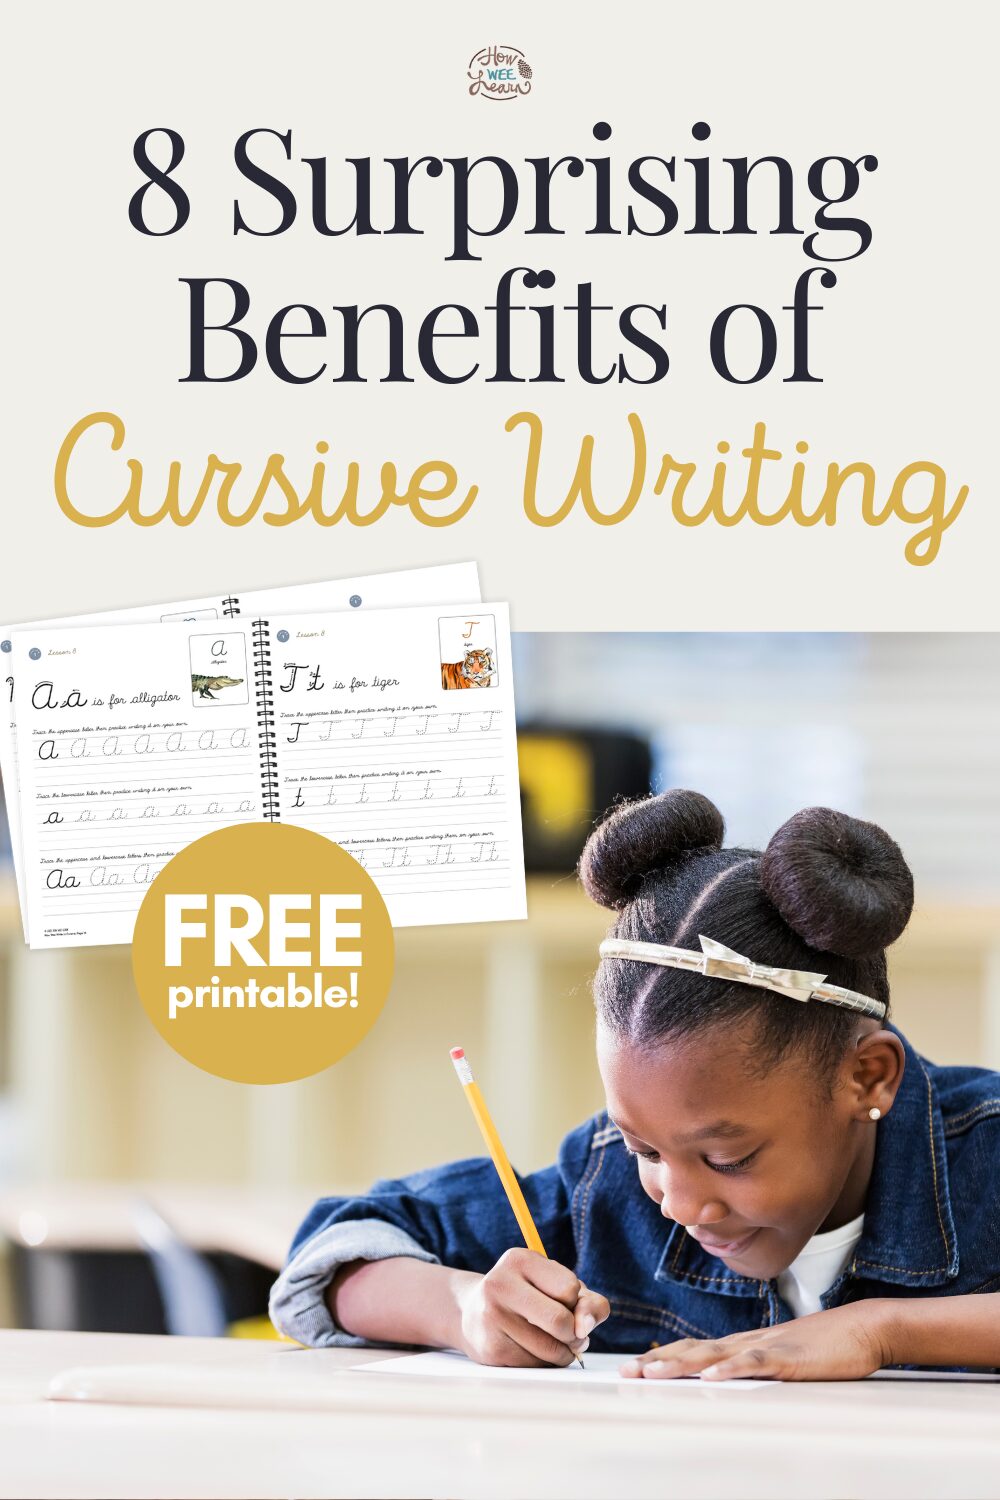 8 Surprising Benefits of Cursive Writing with a Free Printable